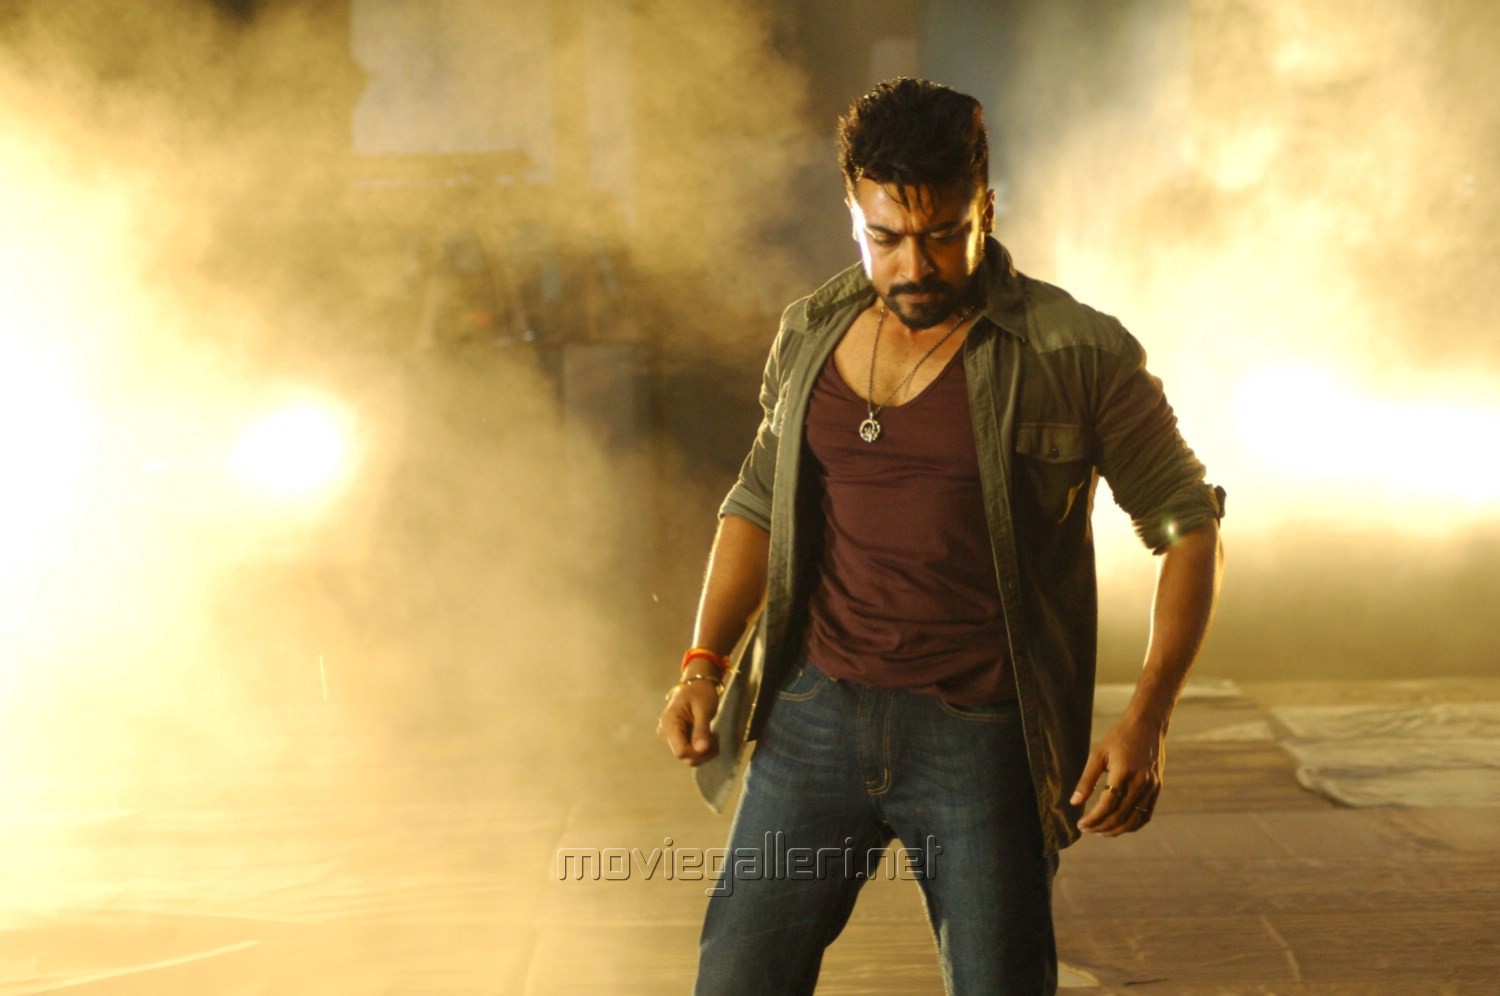 Anjaan cut short by 20 minutes - YouTube